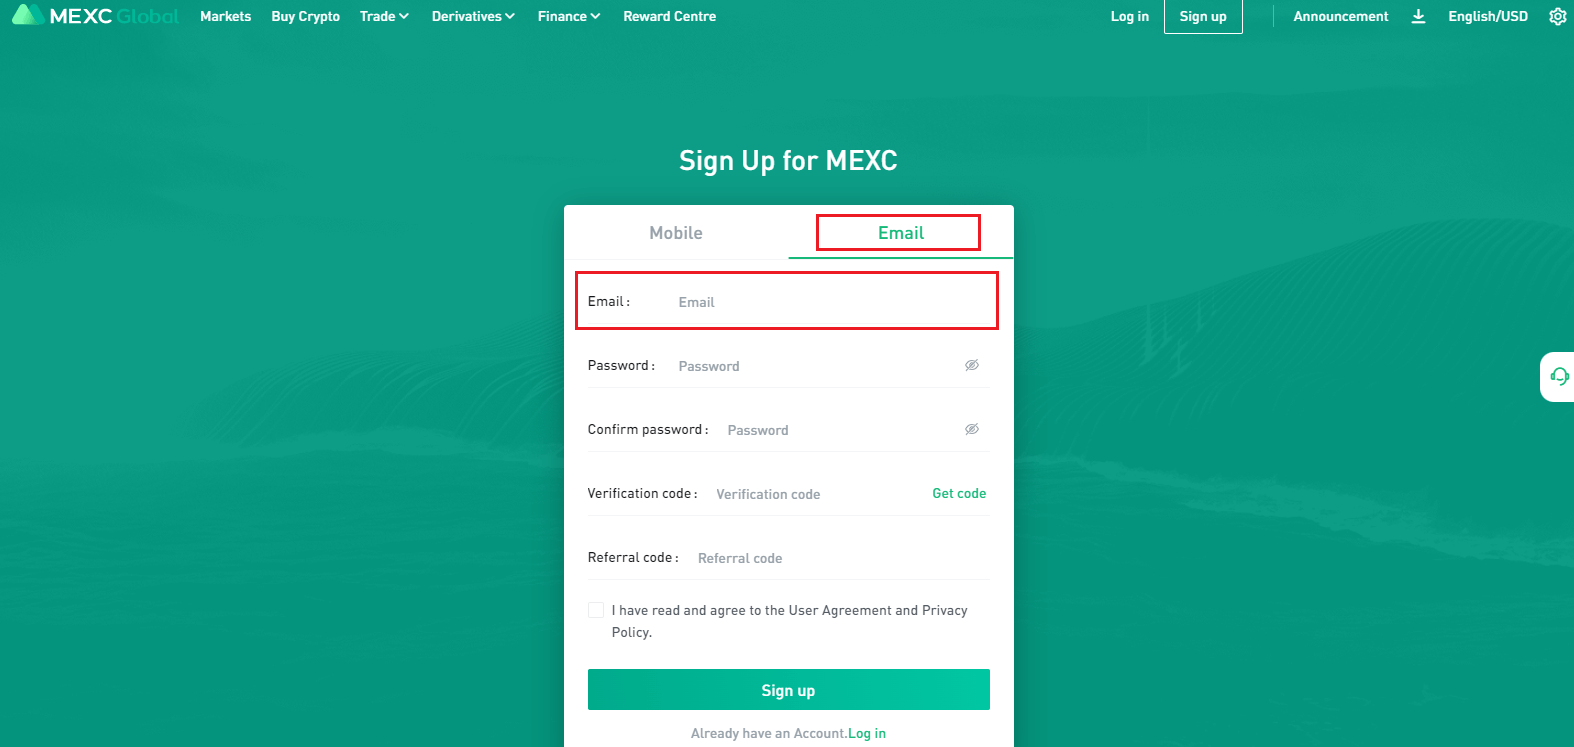 How to Create an Account and Register with MEXC